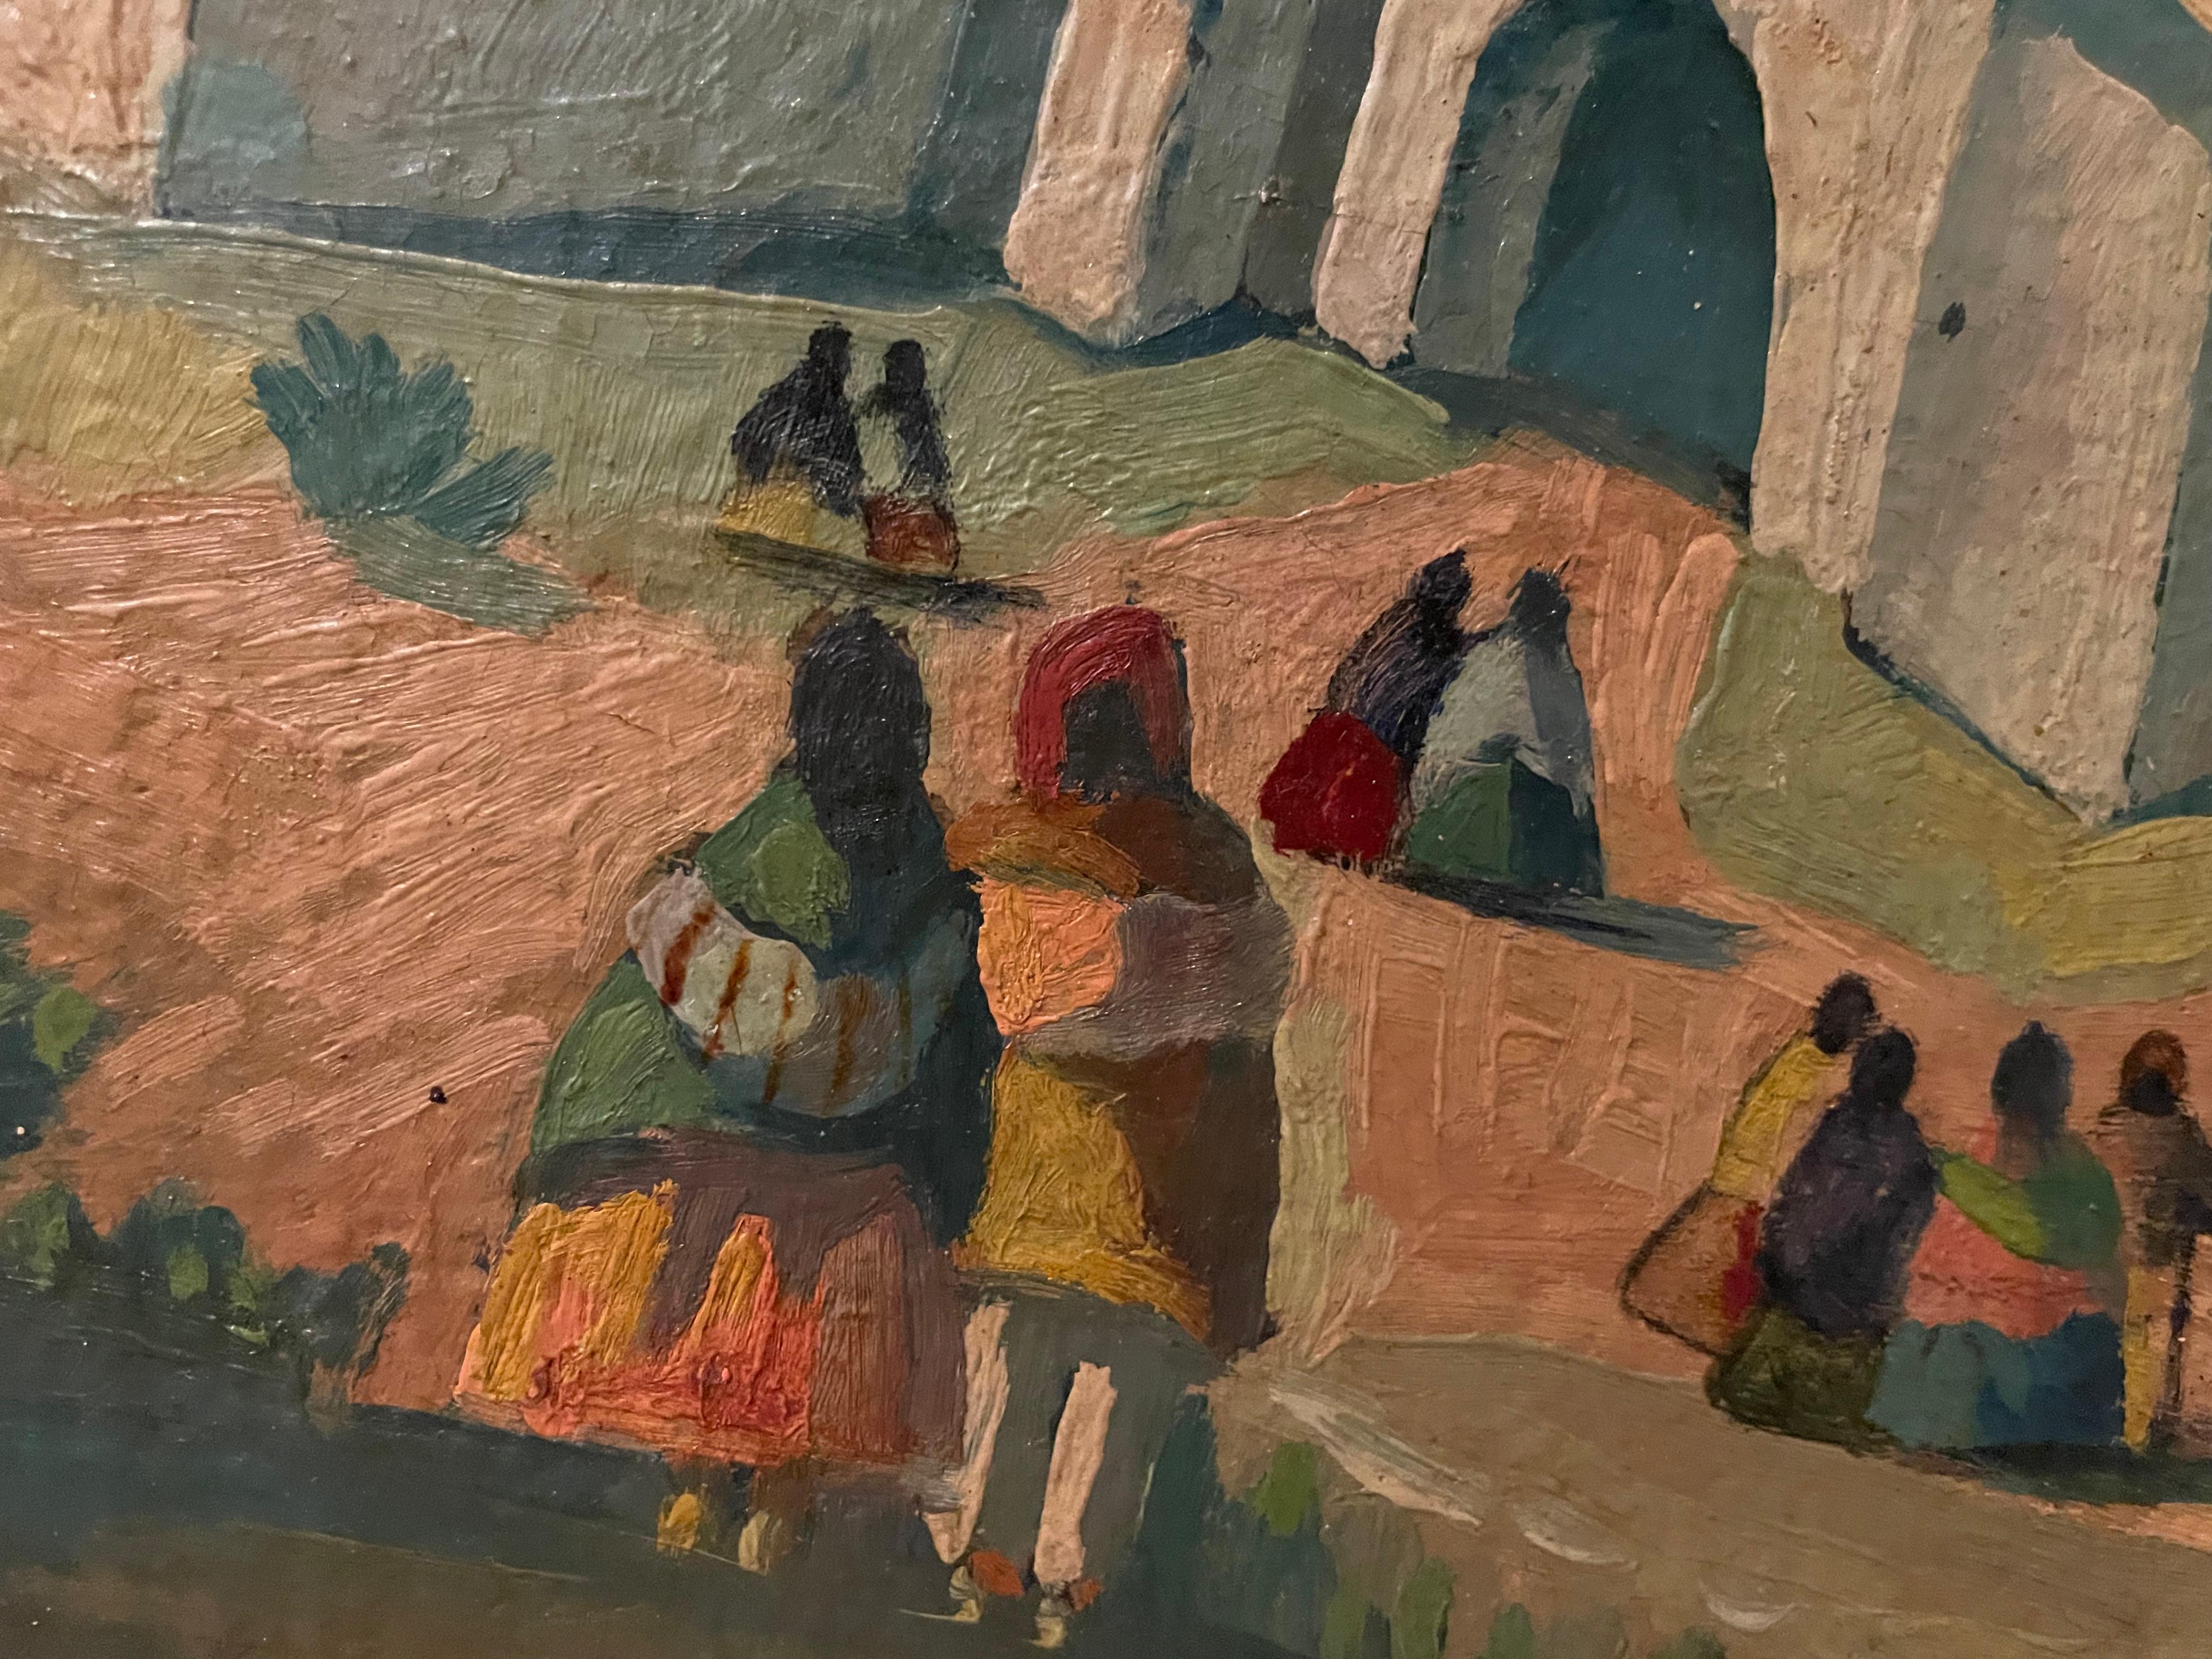 Gaunio appears to have been a Mexican artist. The unmistakable Mexican style depicts people dressed in traditional mexican garb gathered around a church in a mountainous area. 
